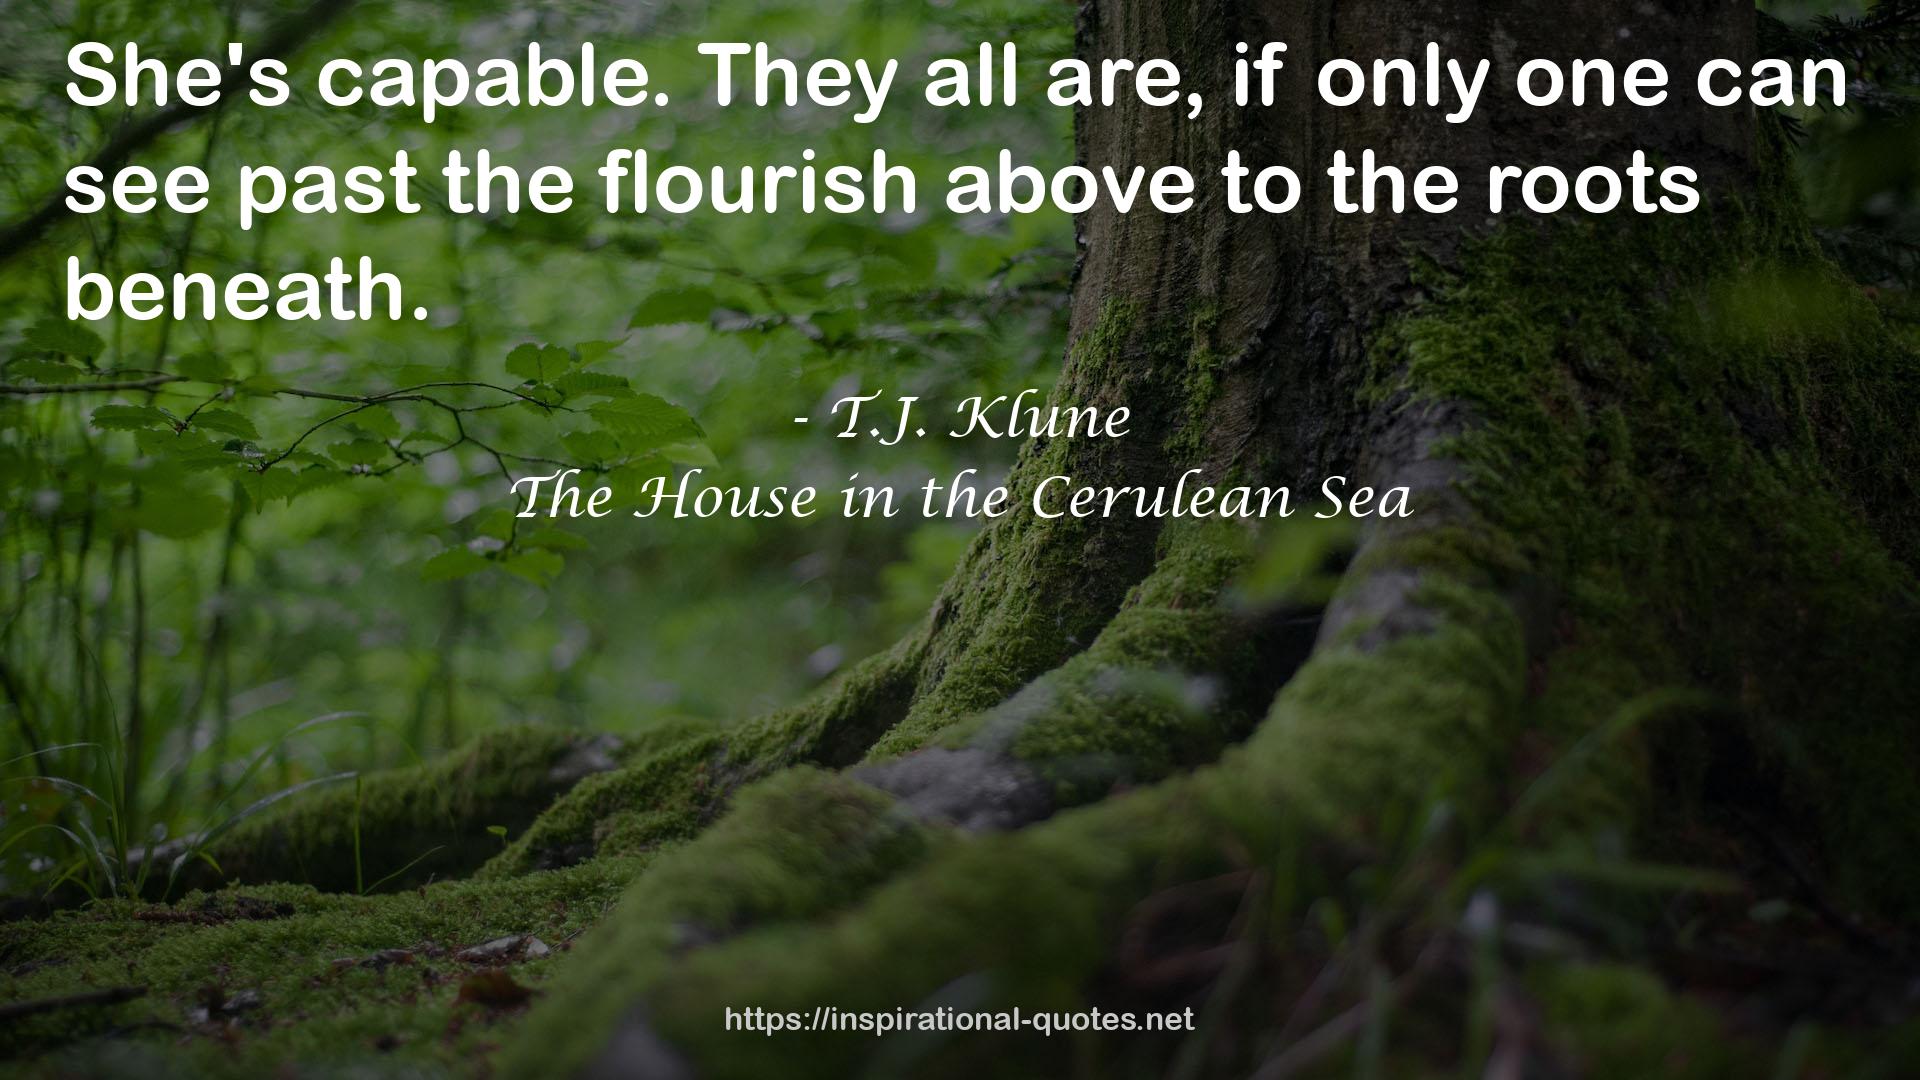 The House in the Cerulean Sea QUOTES